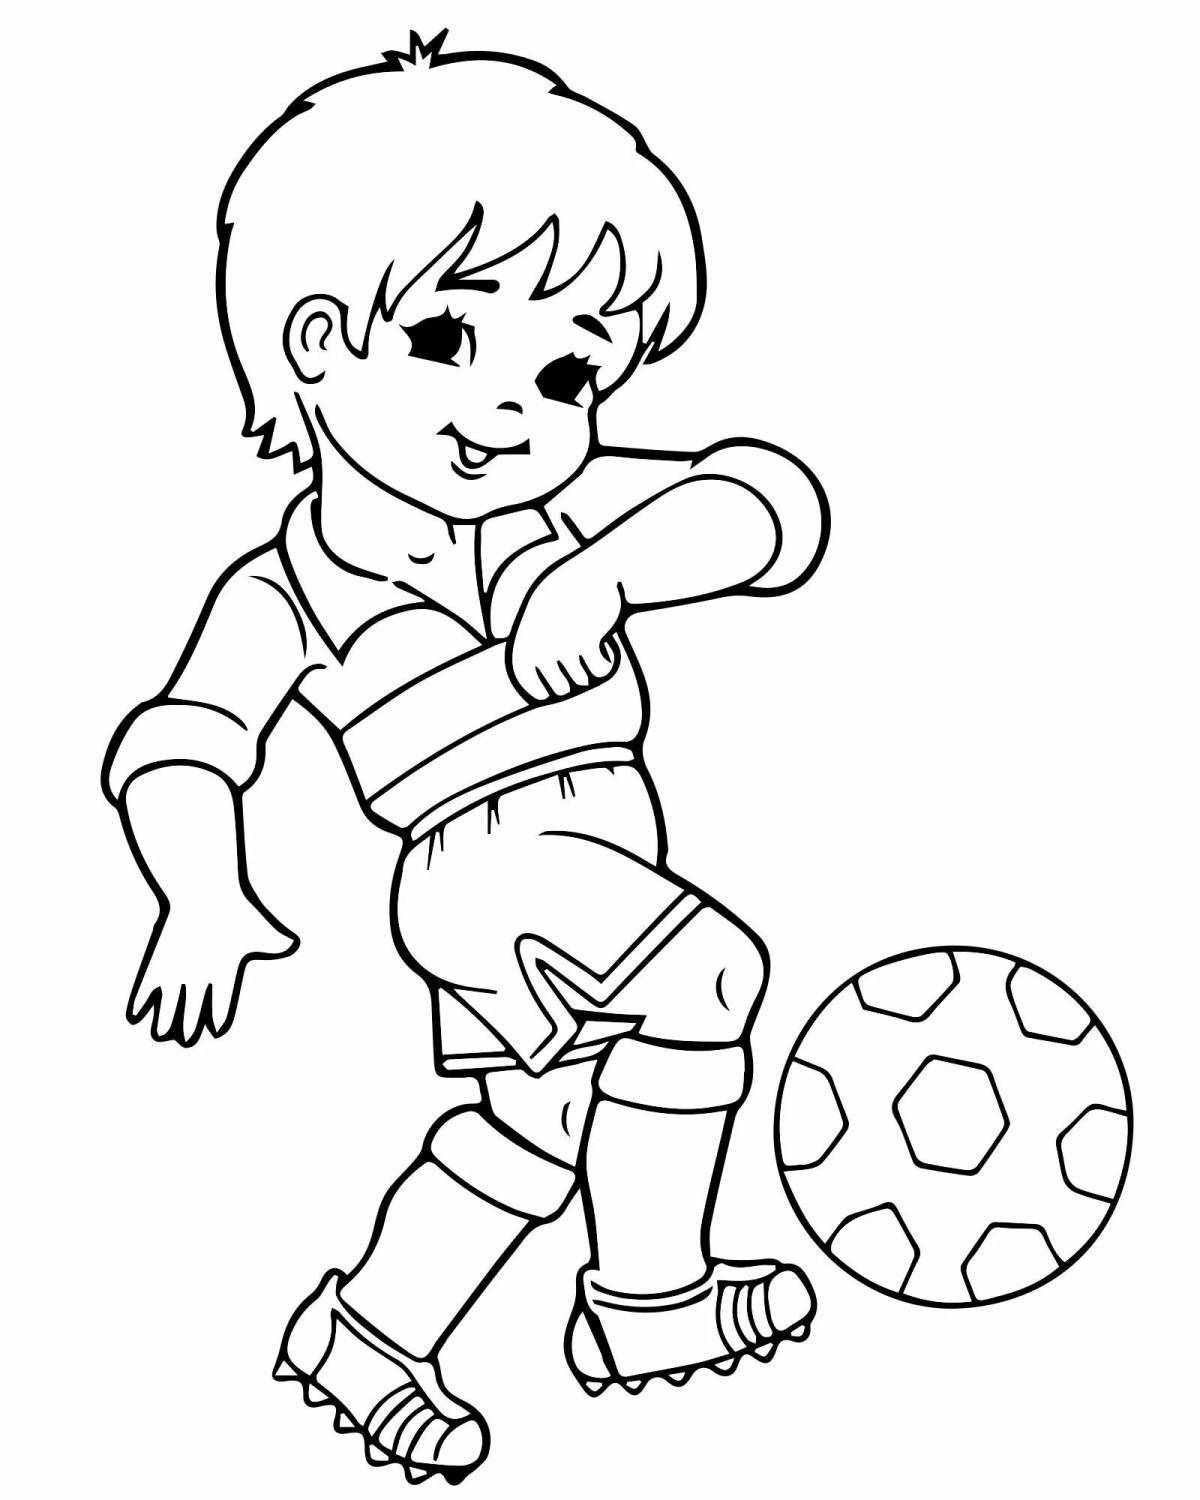 Superb sports coloring page for children 5-6 years old